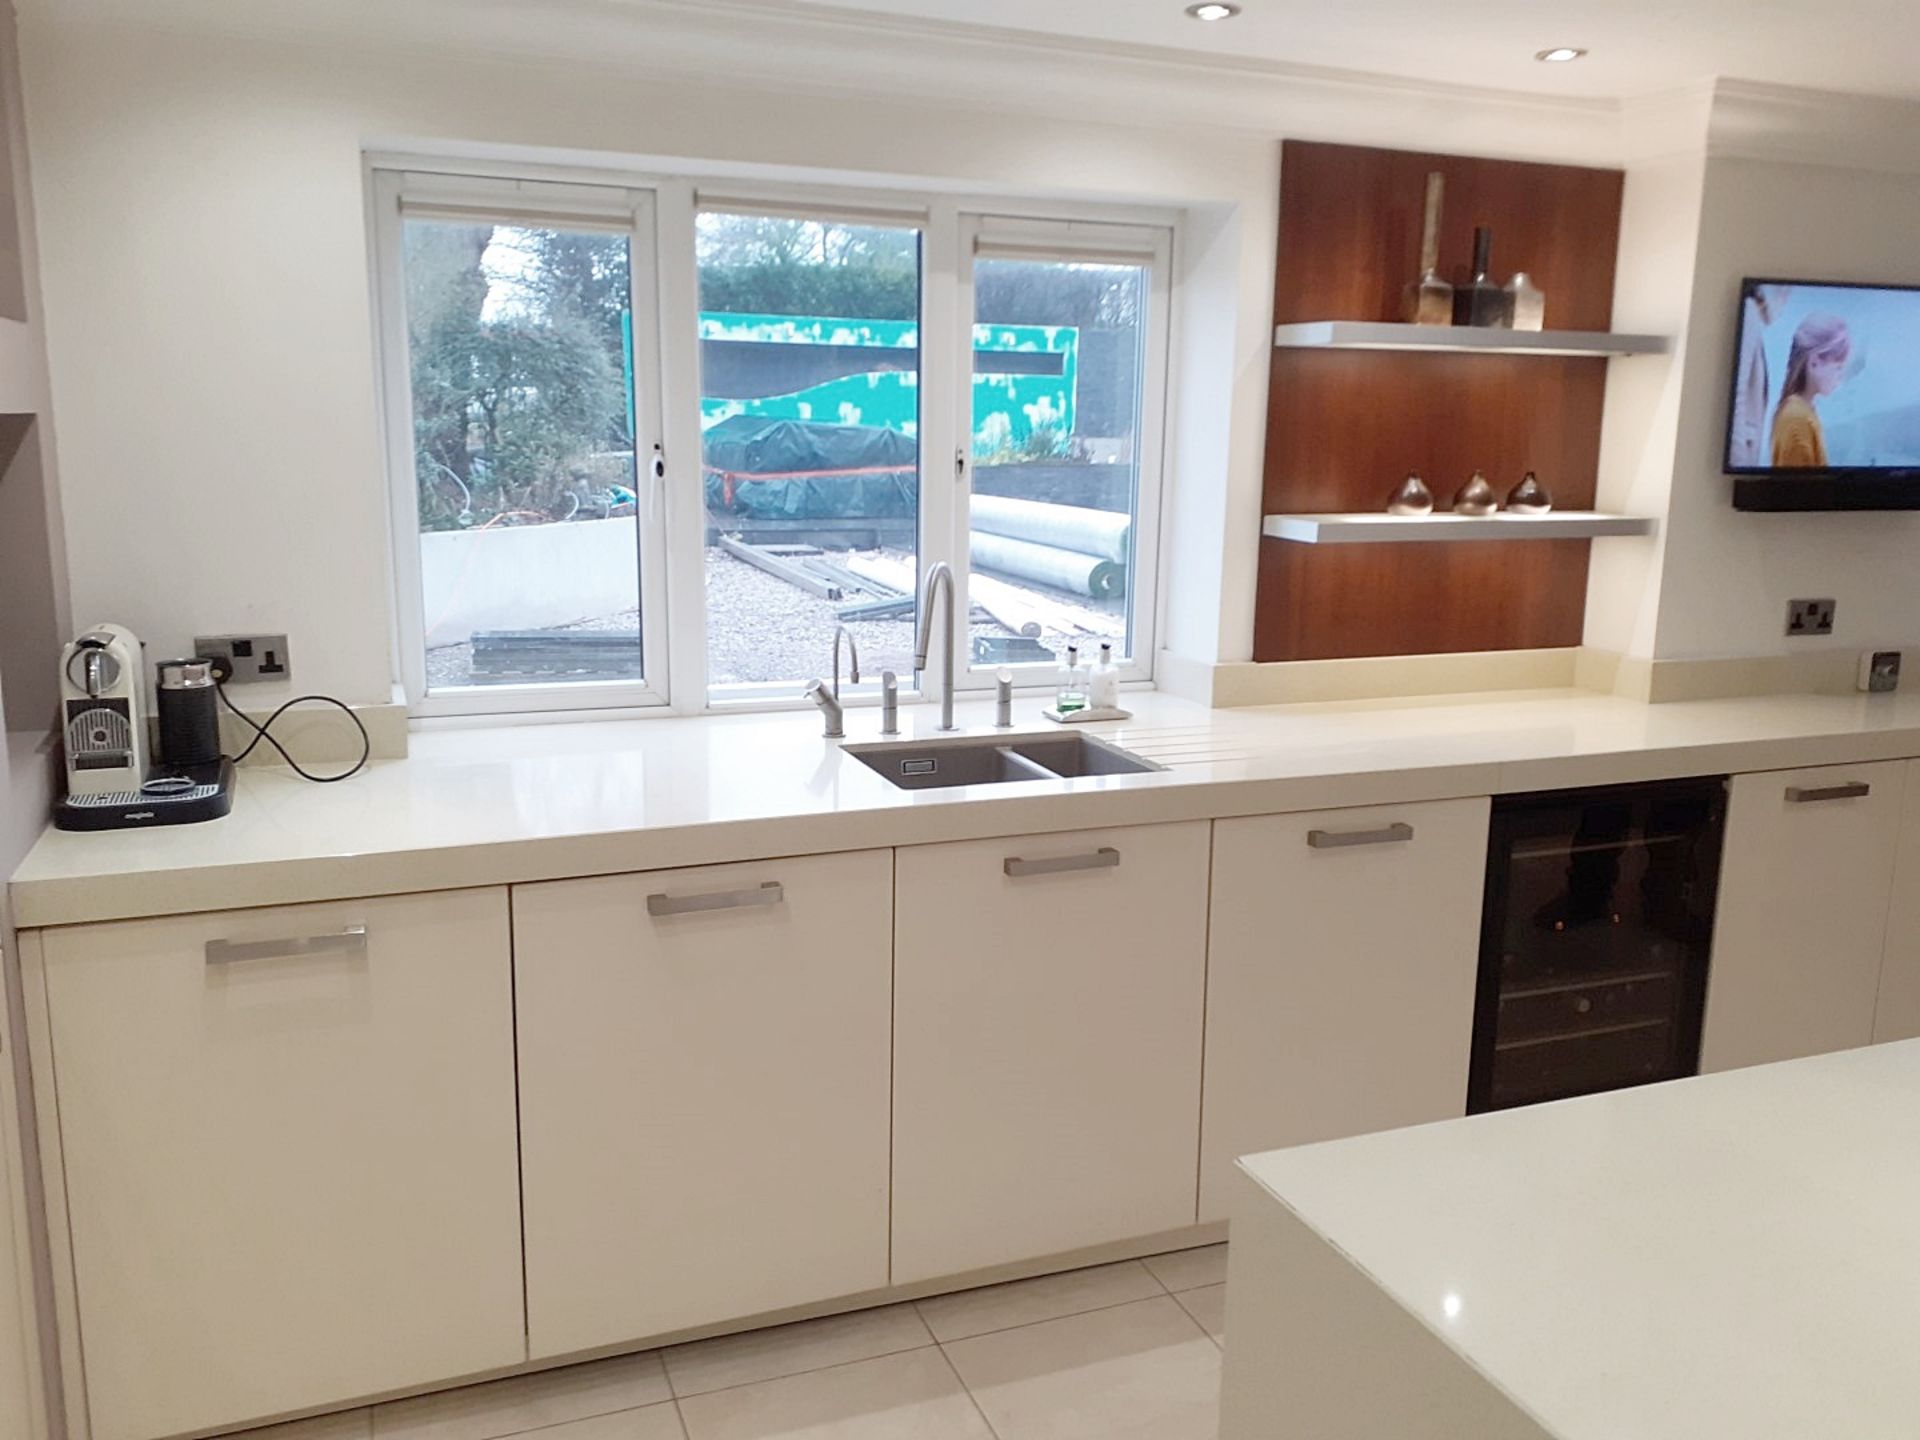 1 x ALNO Fitted Kitchen With Integrated Miele Appliances, Silestone Worktops & Breakfast Island - Image 3 of 86